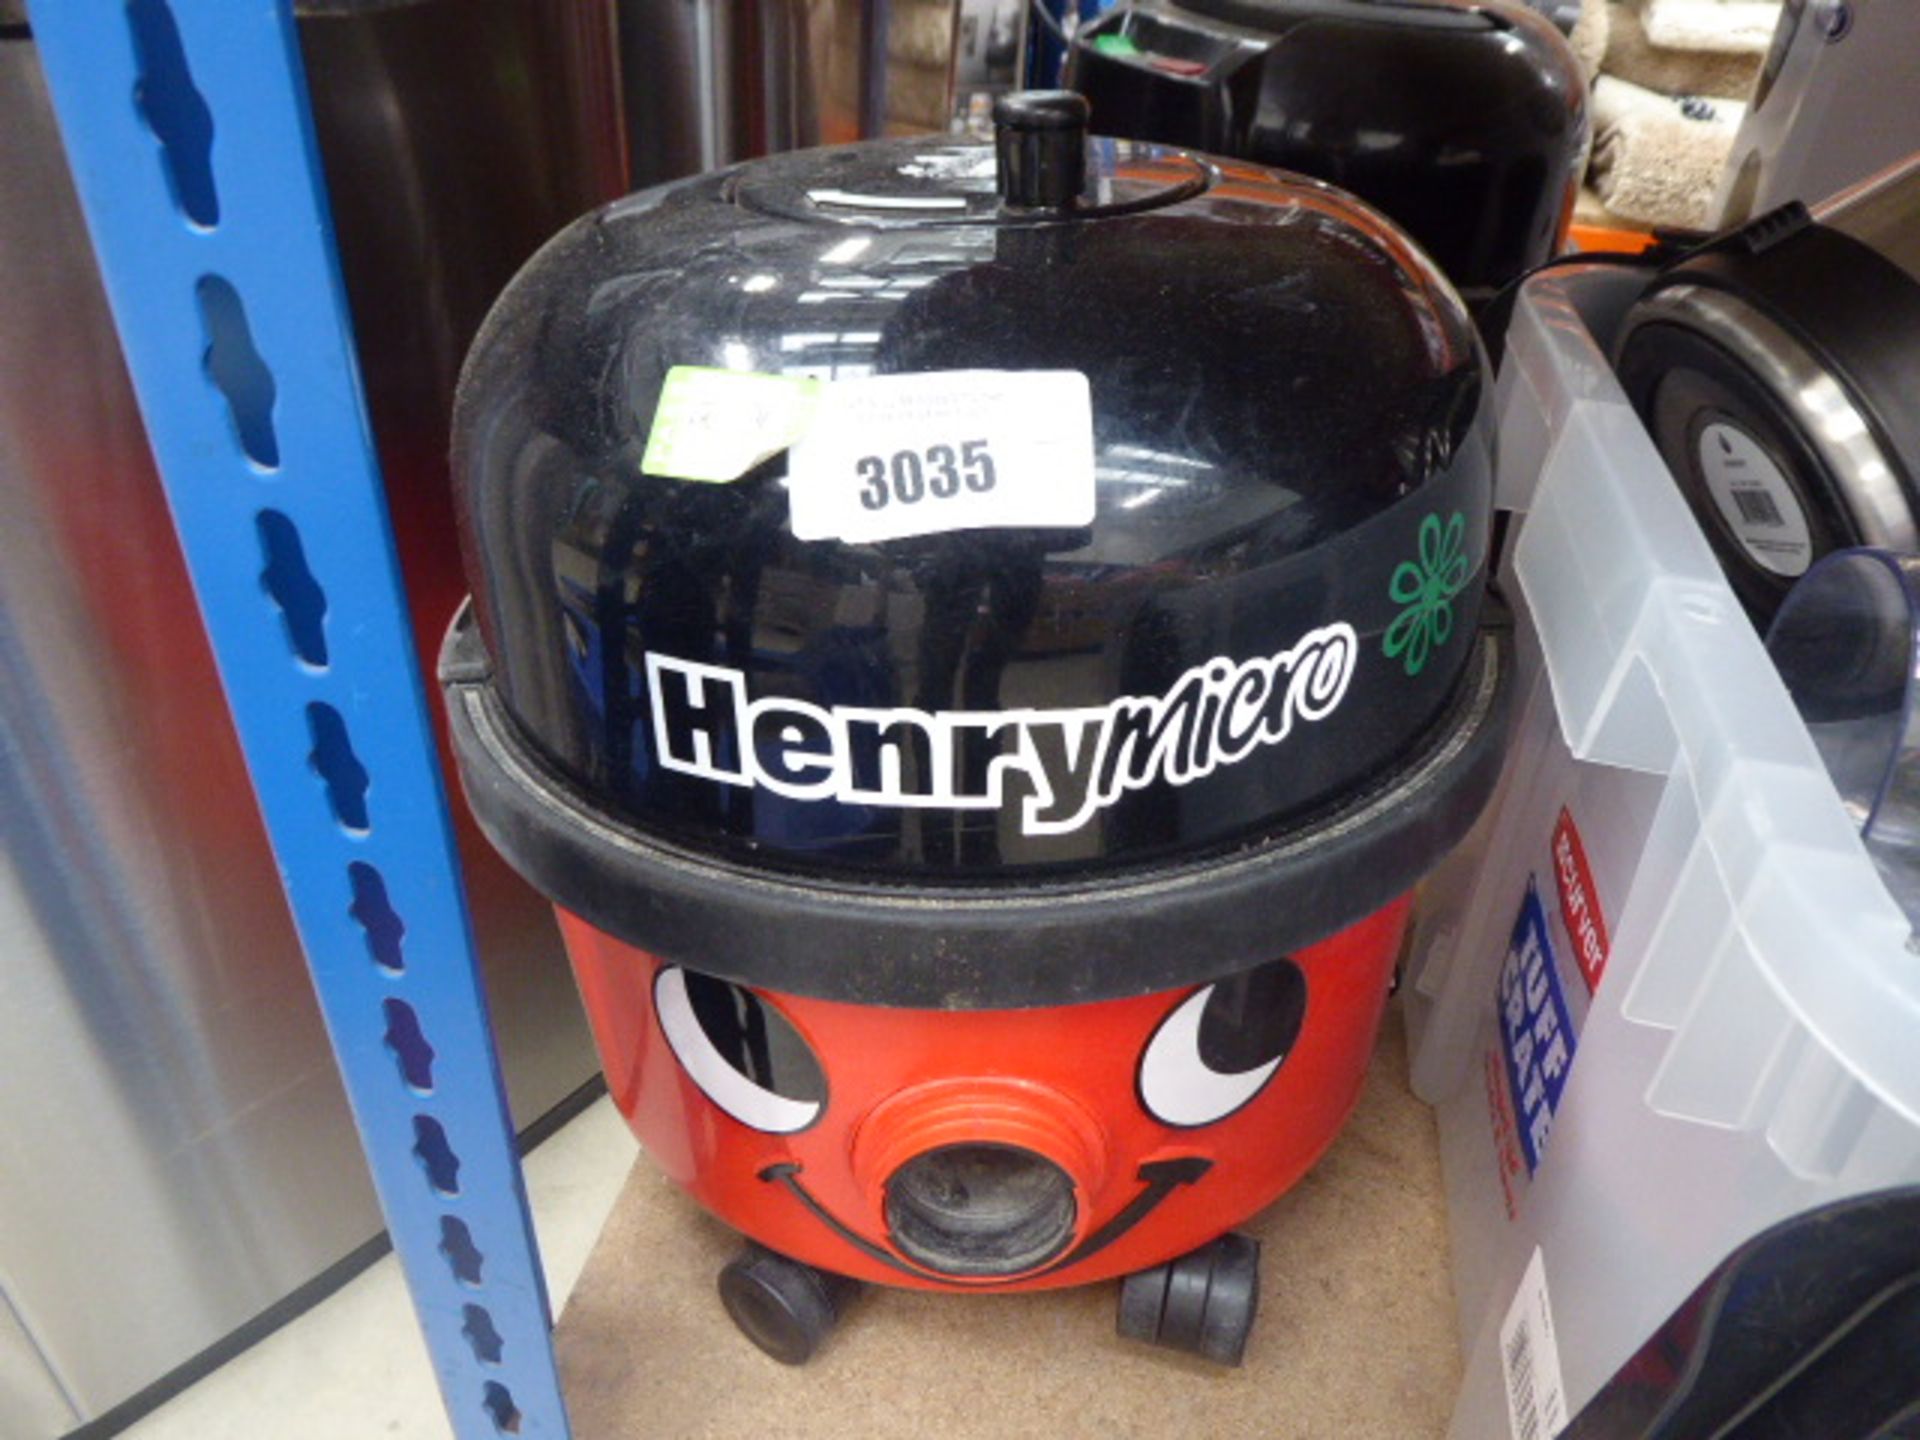 3026 - Henry micro vacuum cleaner no pole and pipe